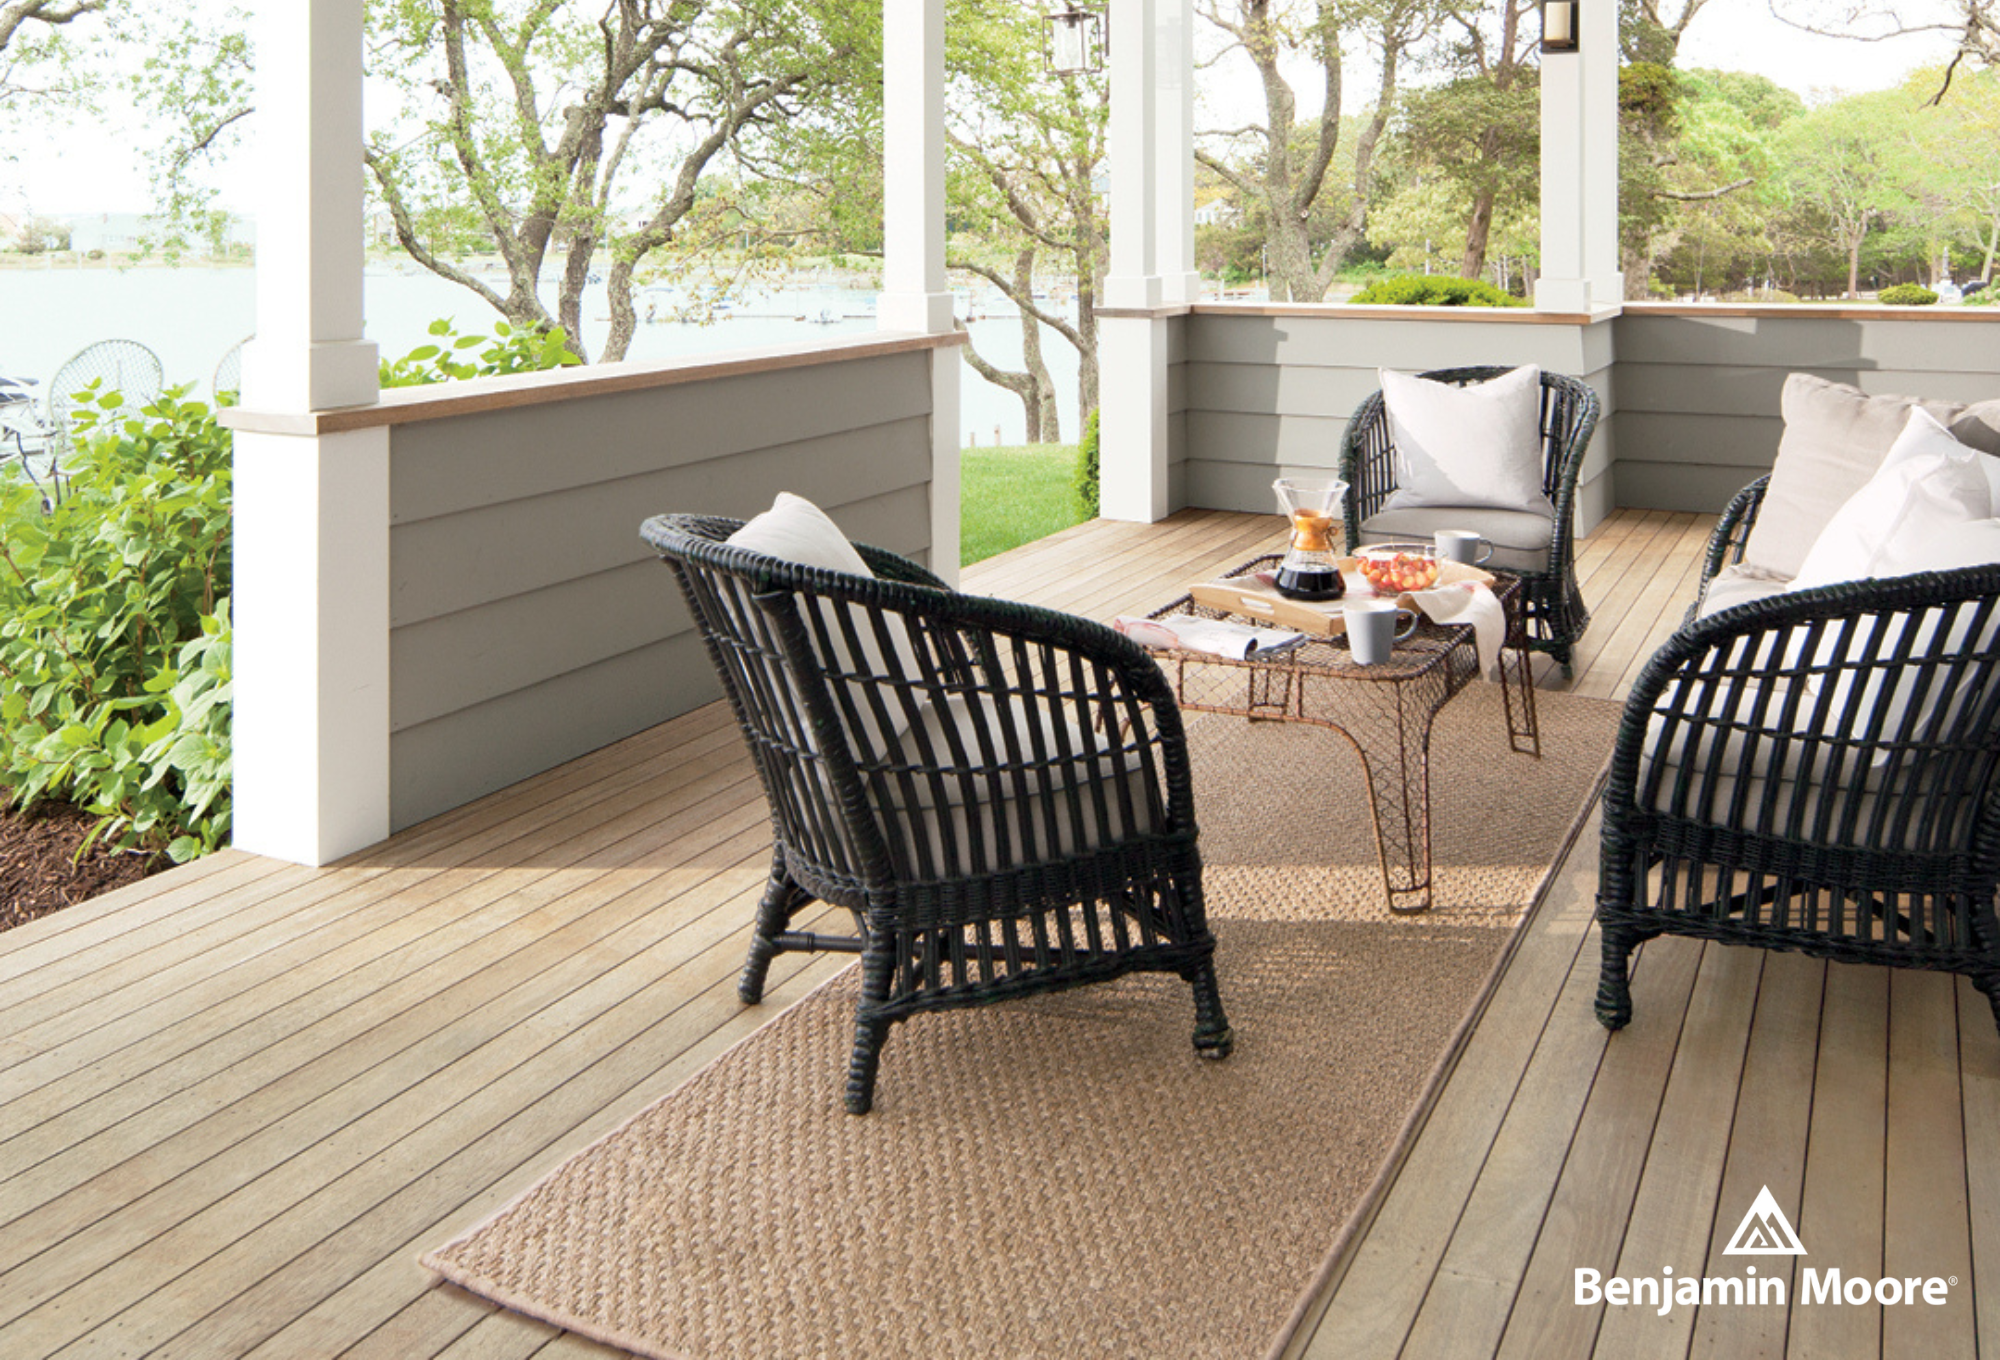 Arborcoat exterior deck stain available at JC Licht.